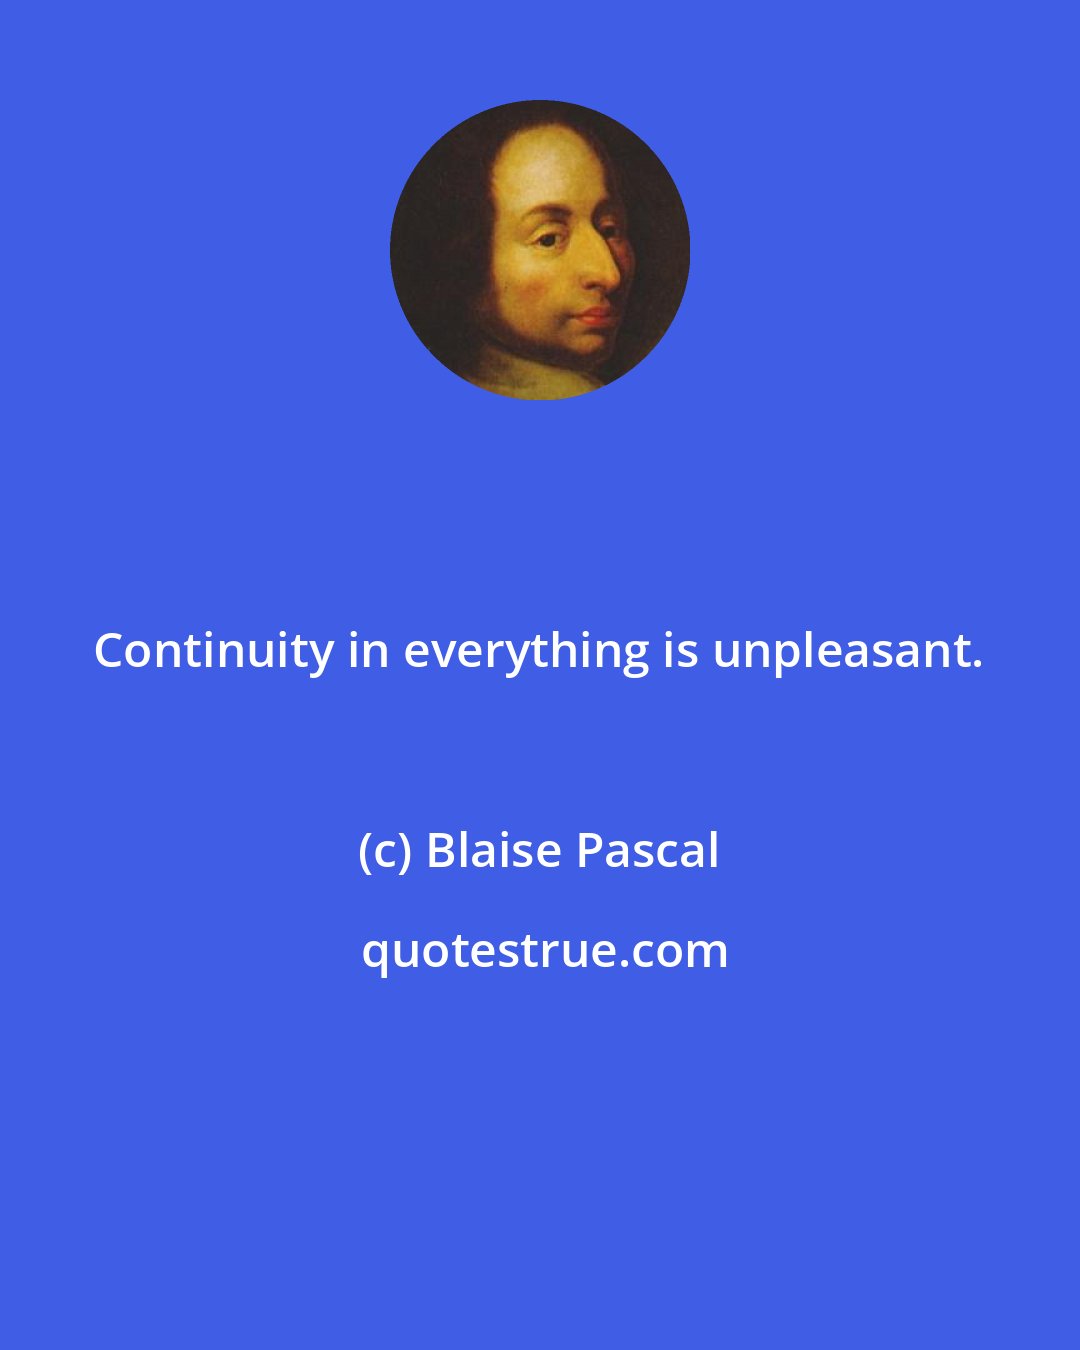 Blaise Pascal: Continuity in everything is unpleasant.